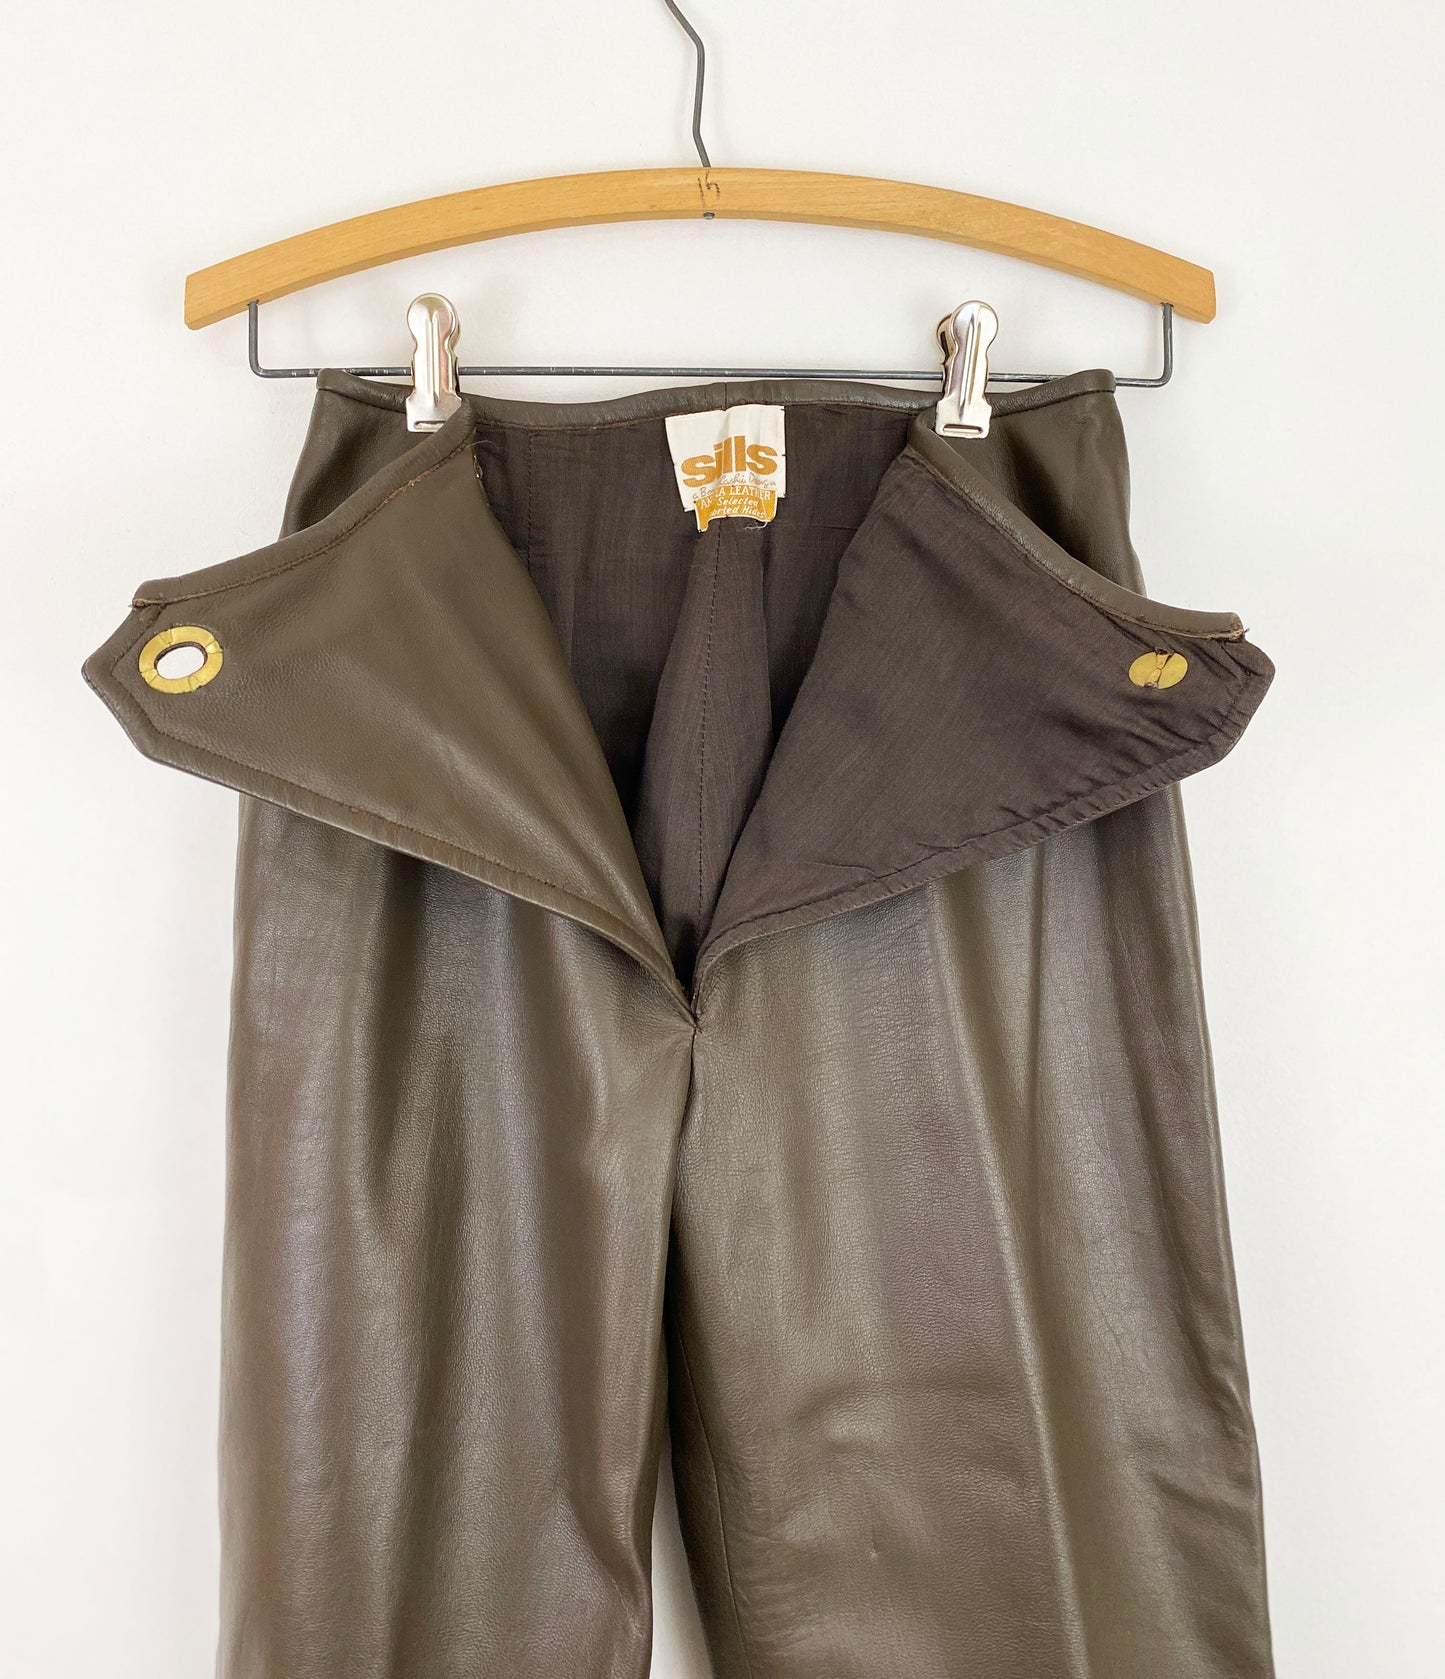 1960-1970s Bonnie Cashin Sills Dark Brown Leather Cross Front Tapered Pants with Turn Lock Closure / Size XS/S